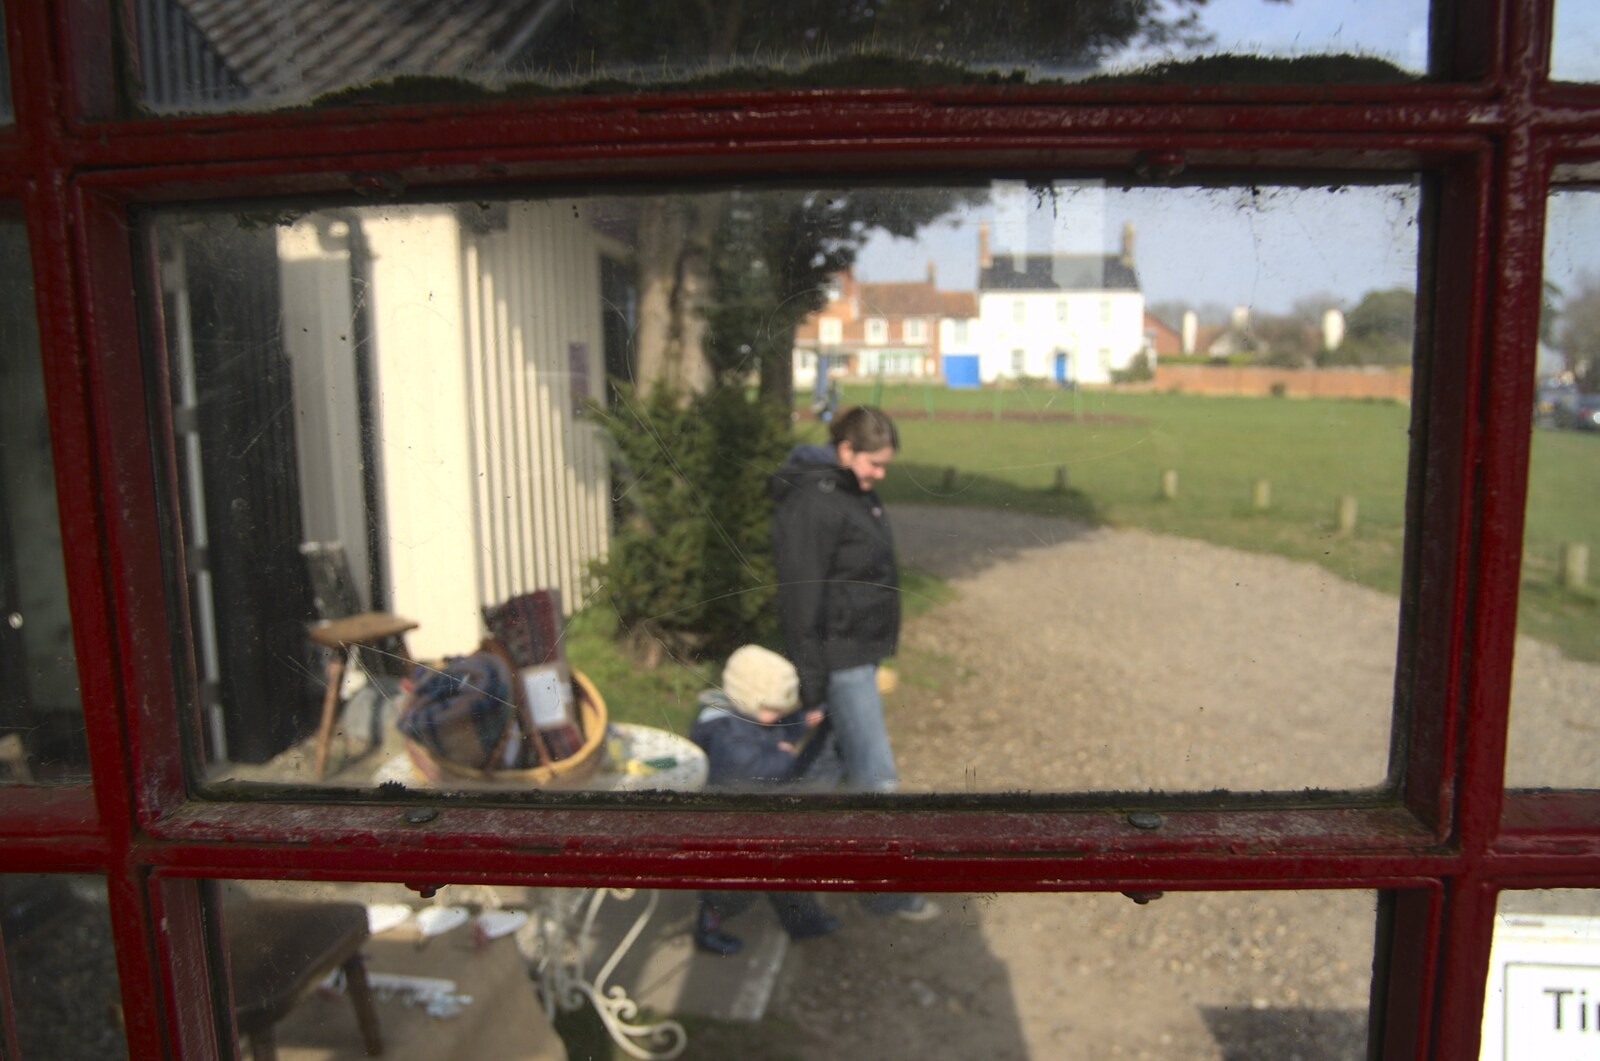 The view of Walberswick from inside a K6 phone box from A Trip To The Coast, Walberswick, Suffolk - 20th March 2011